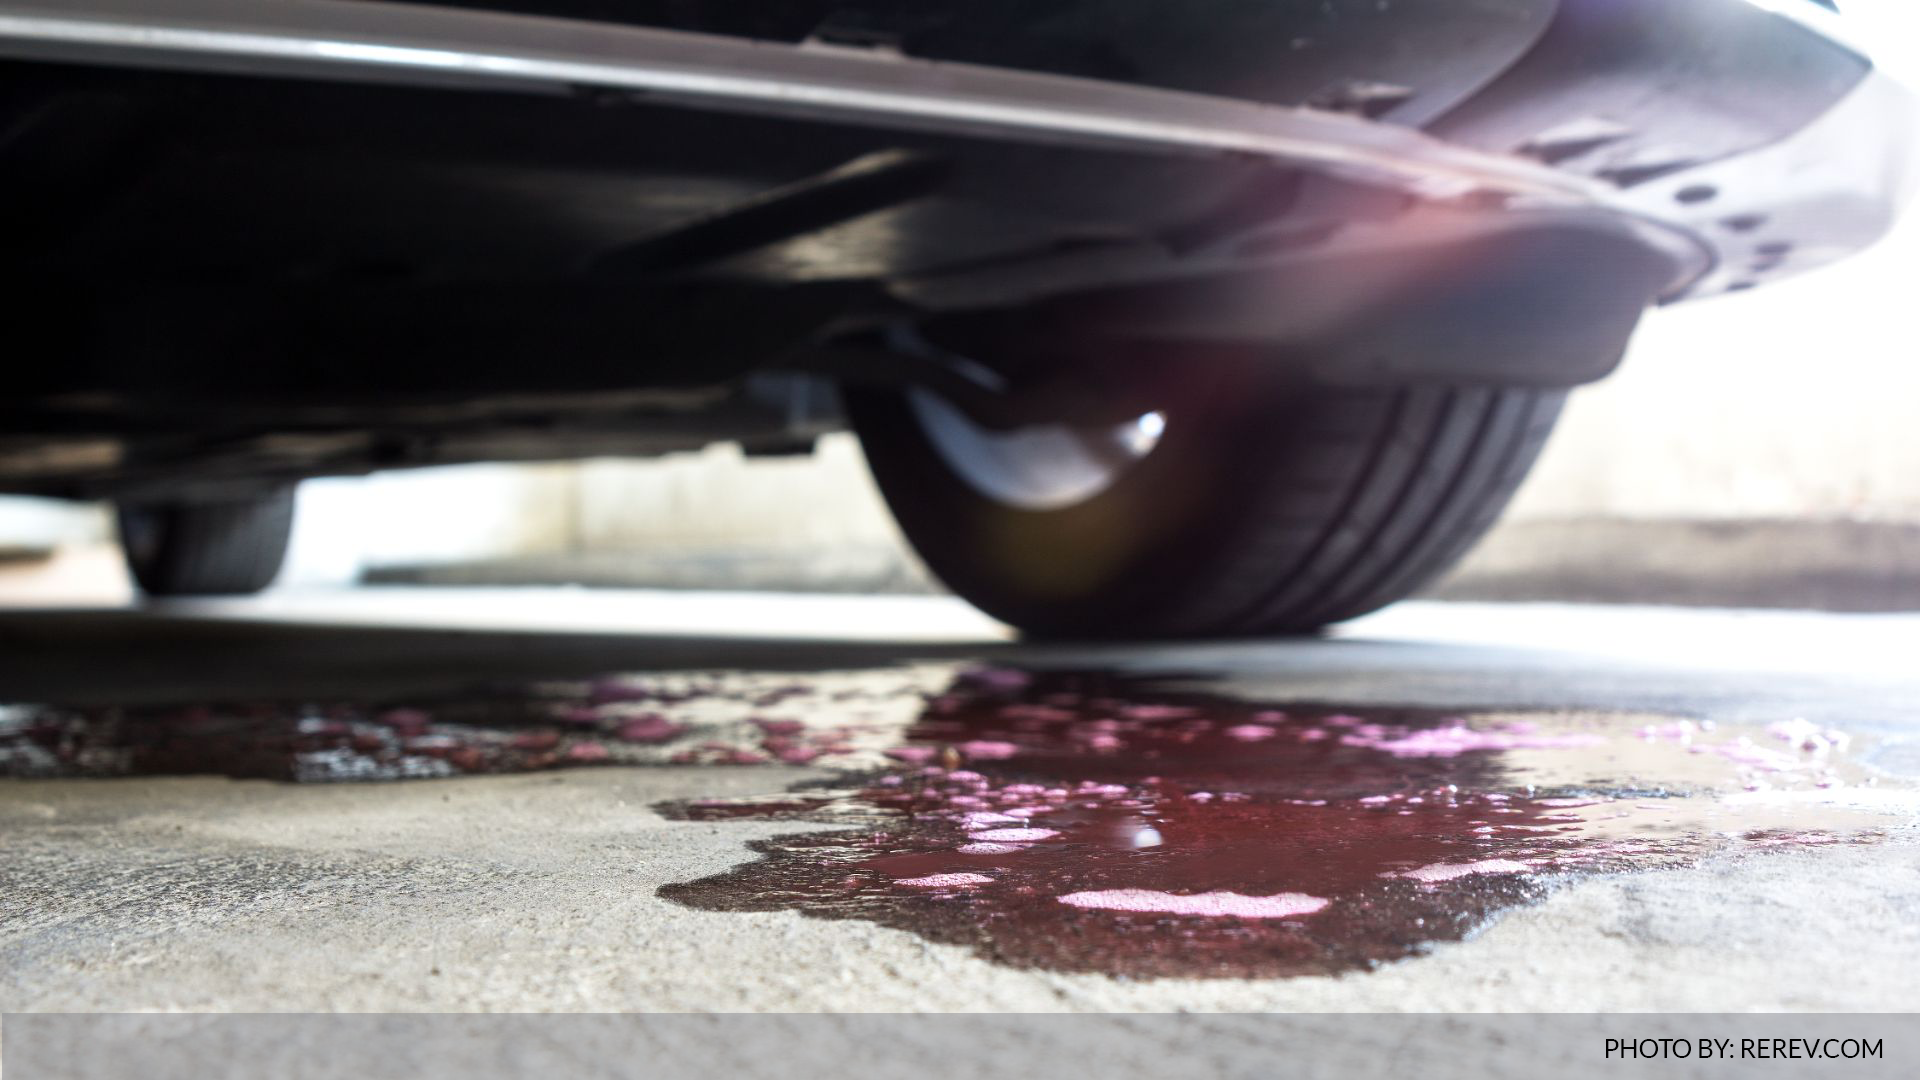 why my car is leaking fluids?: Identify what liquid is dripping and what to do